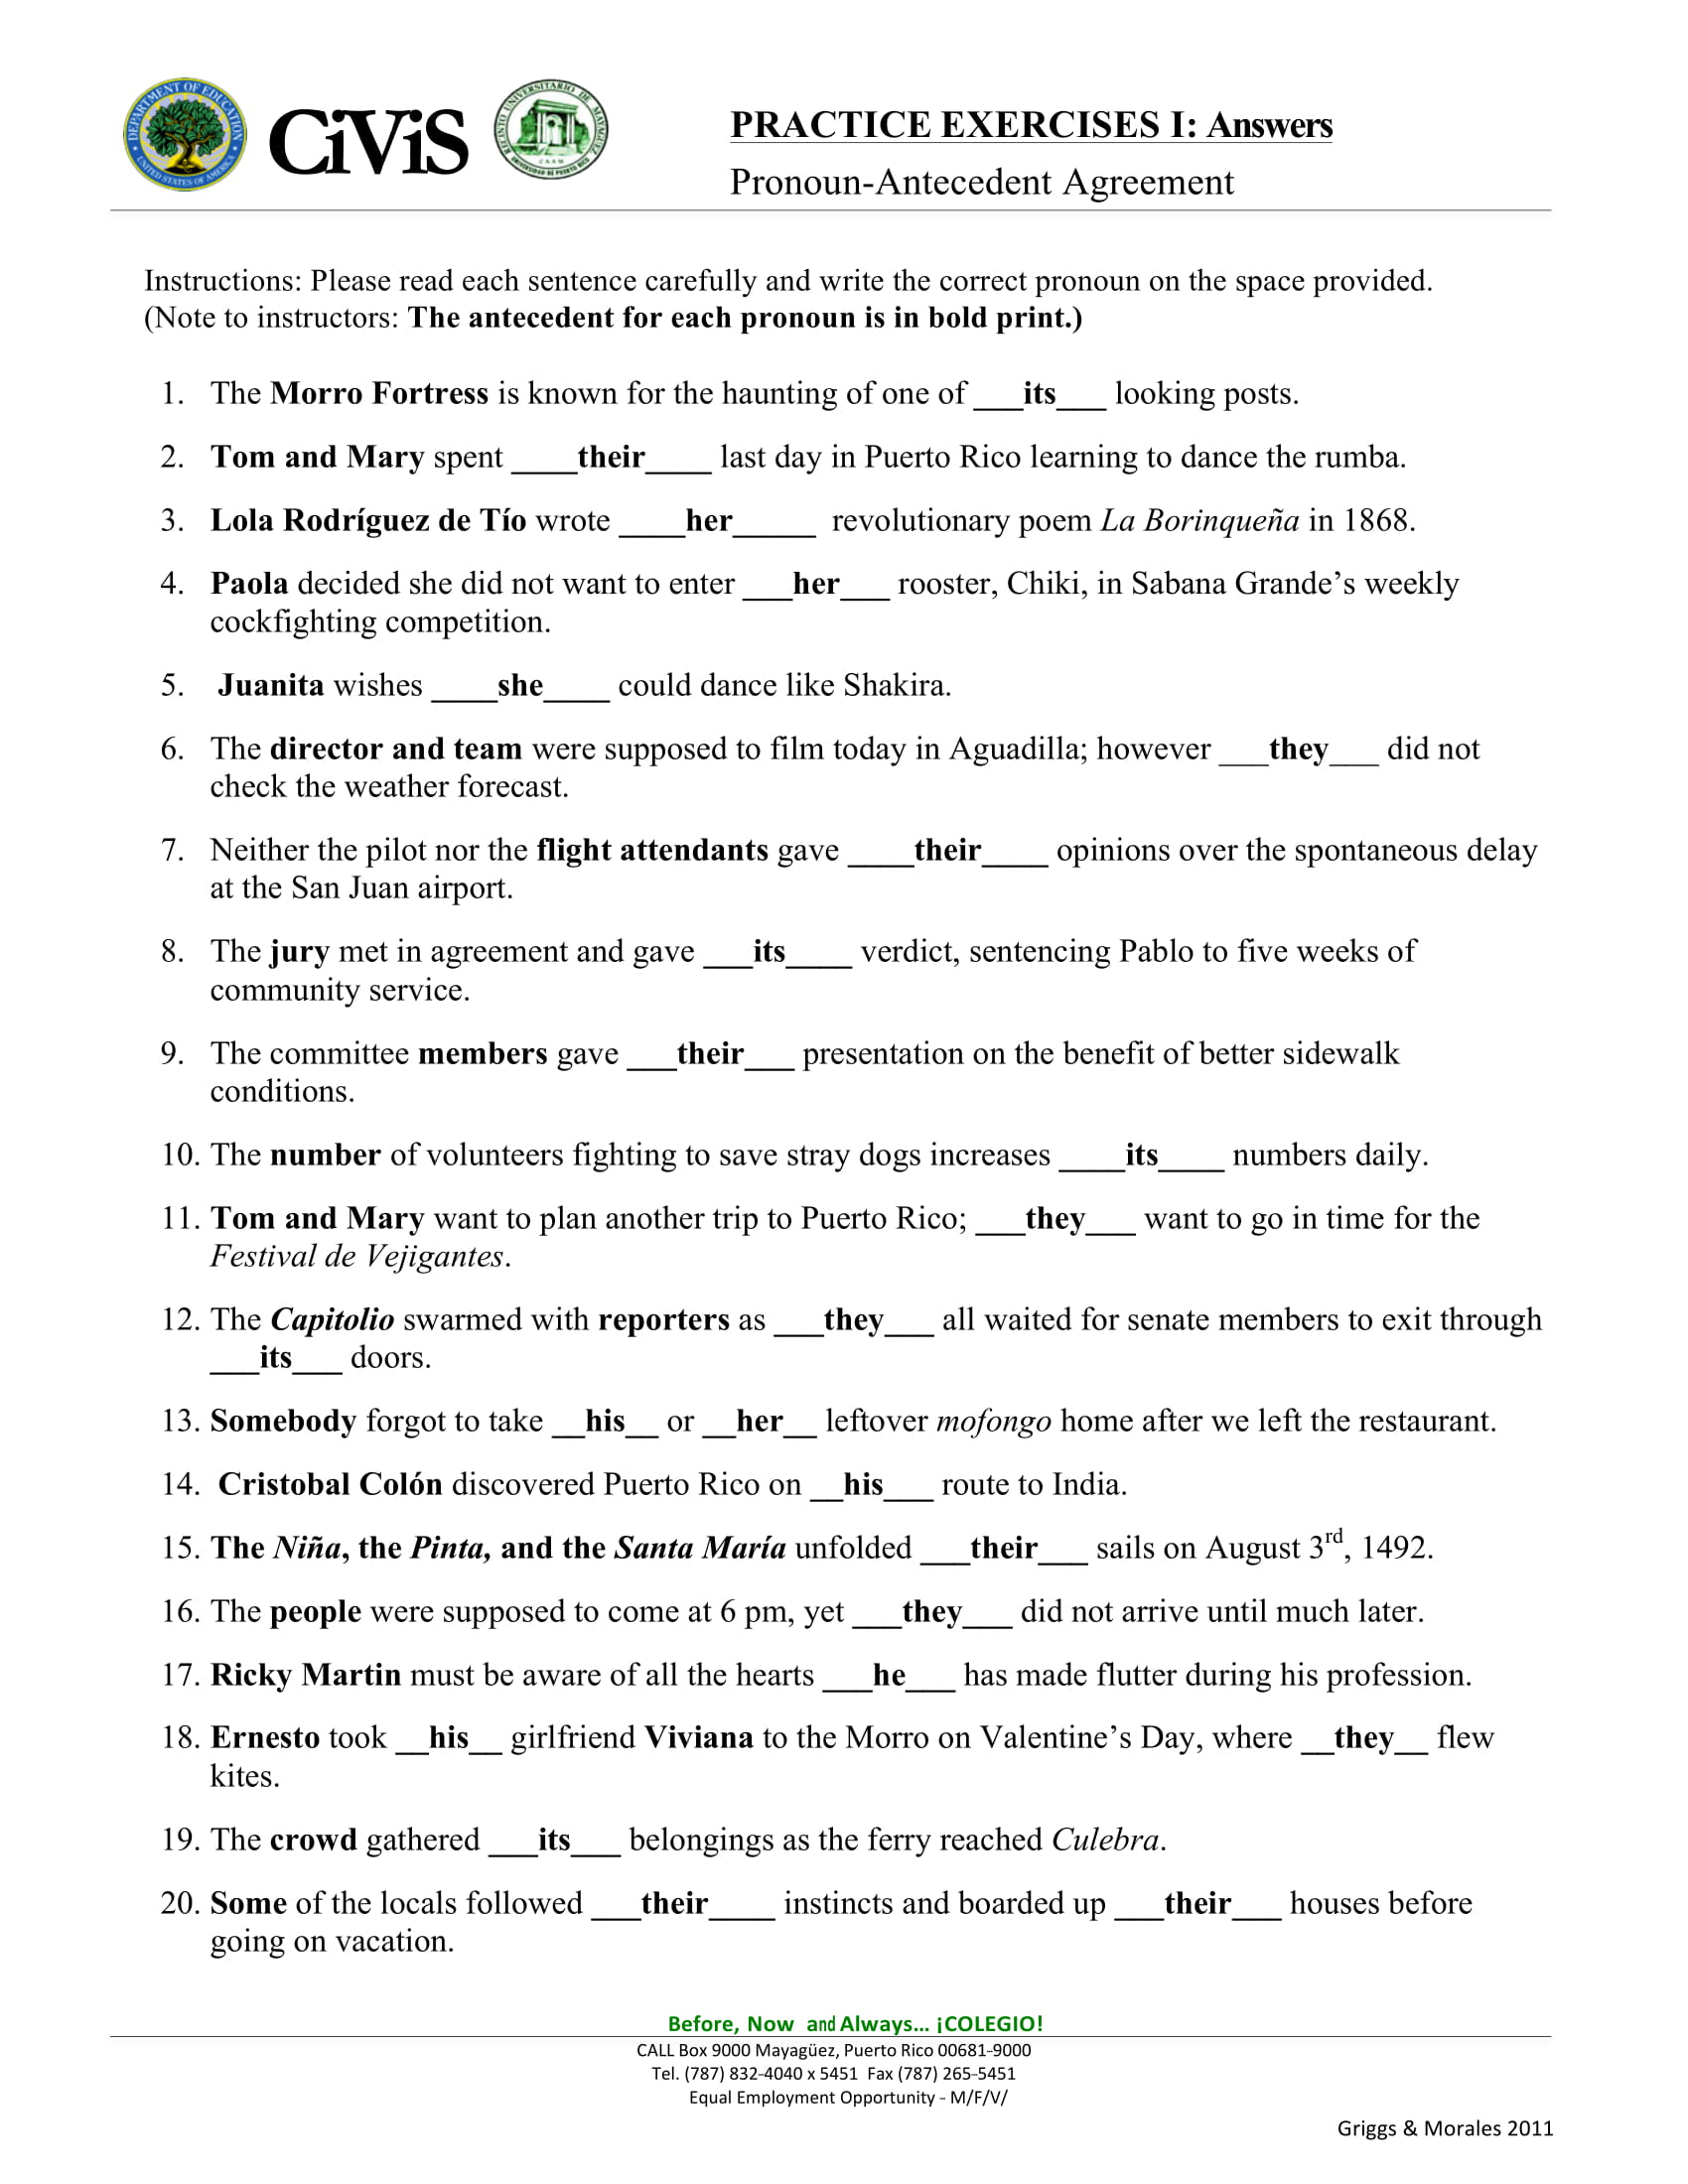 Indefinite Pronouns As Antecedents Worksheet Answers